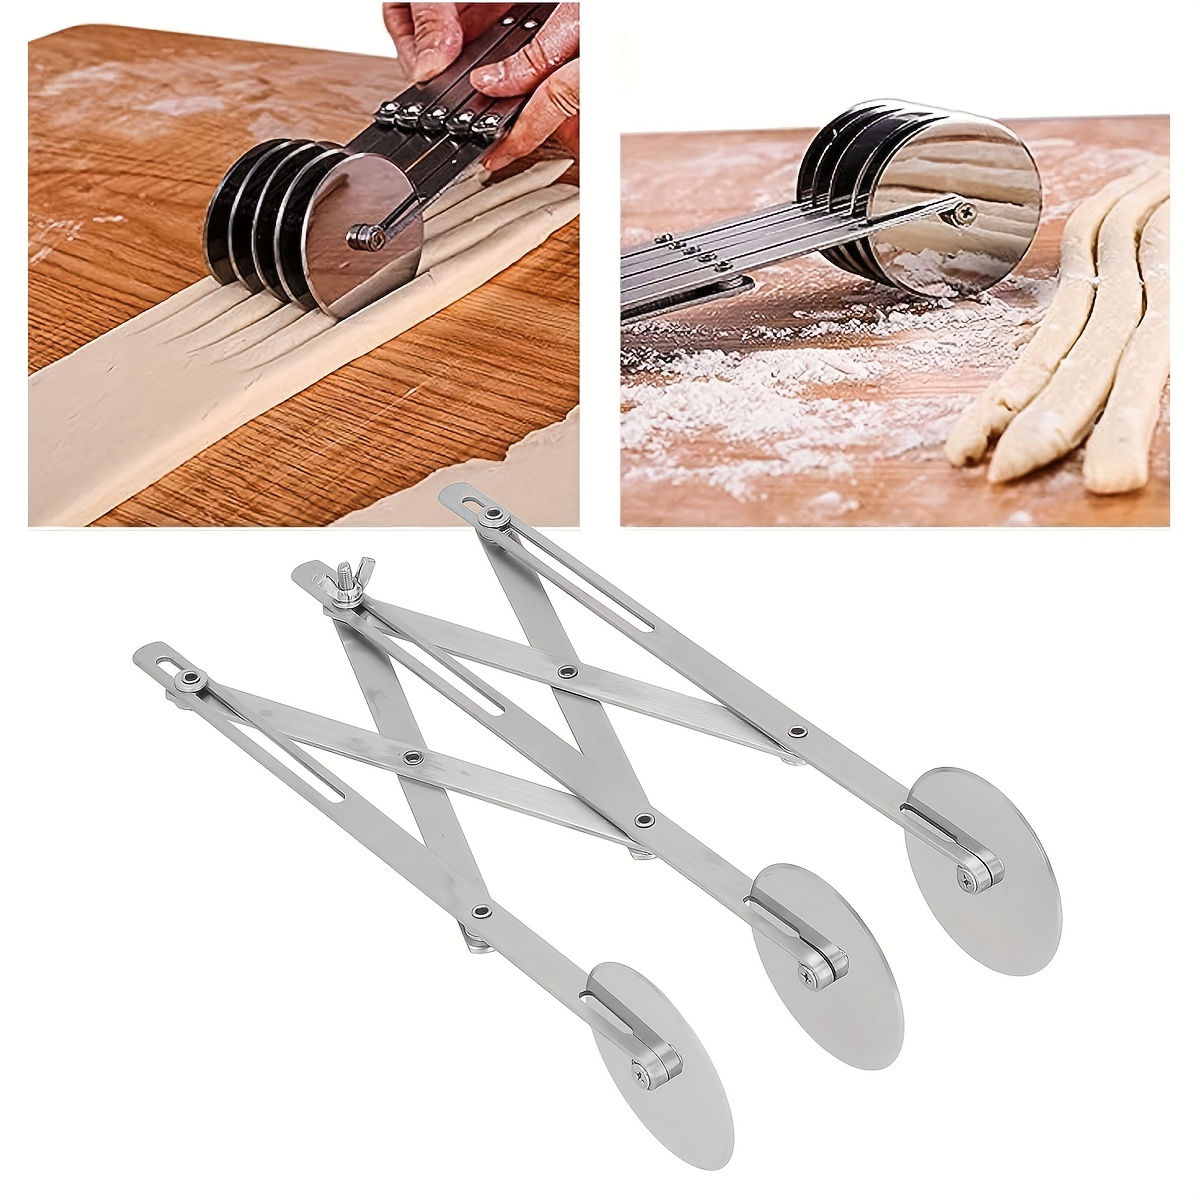 5 Wheel Pastry Slicer Multi-Round Dough Roller Cookie Pastry Knife Divider  Pizza Cutter